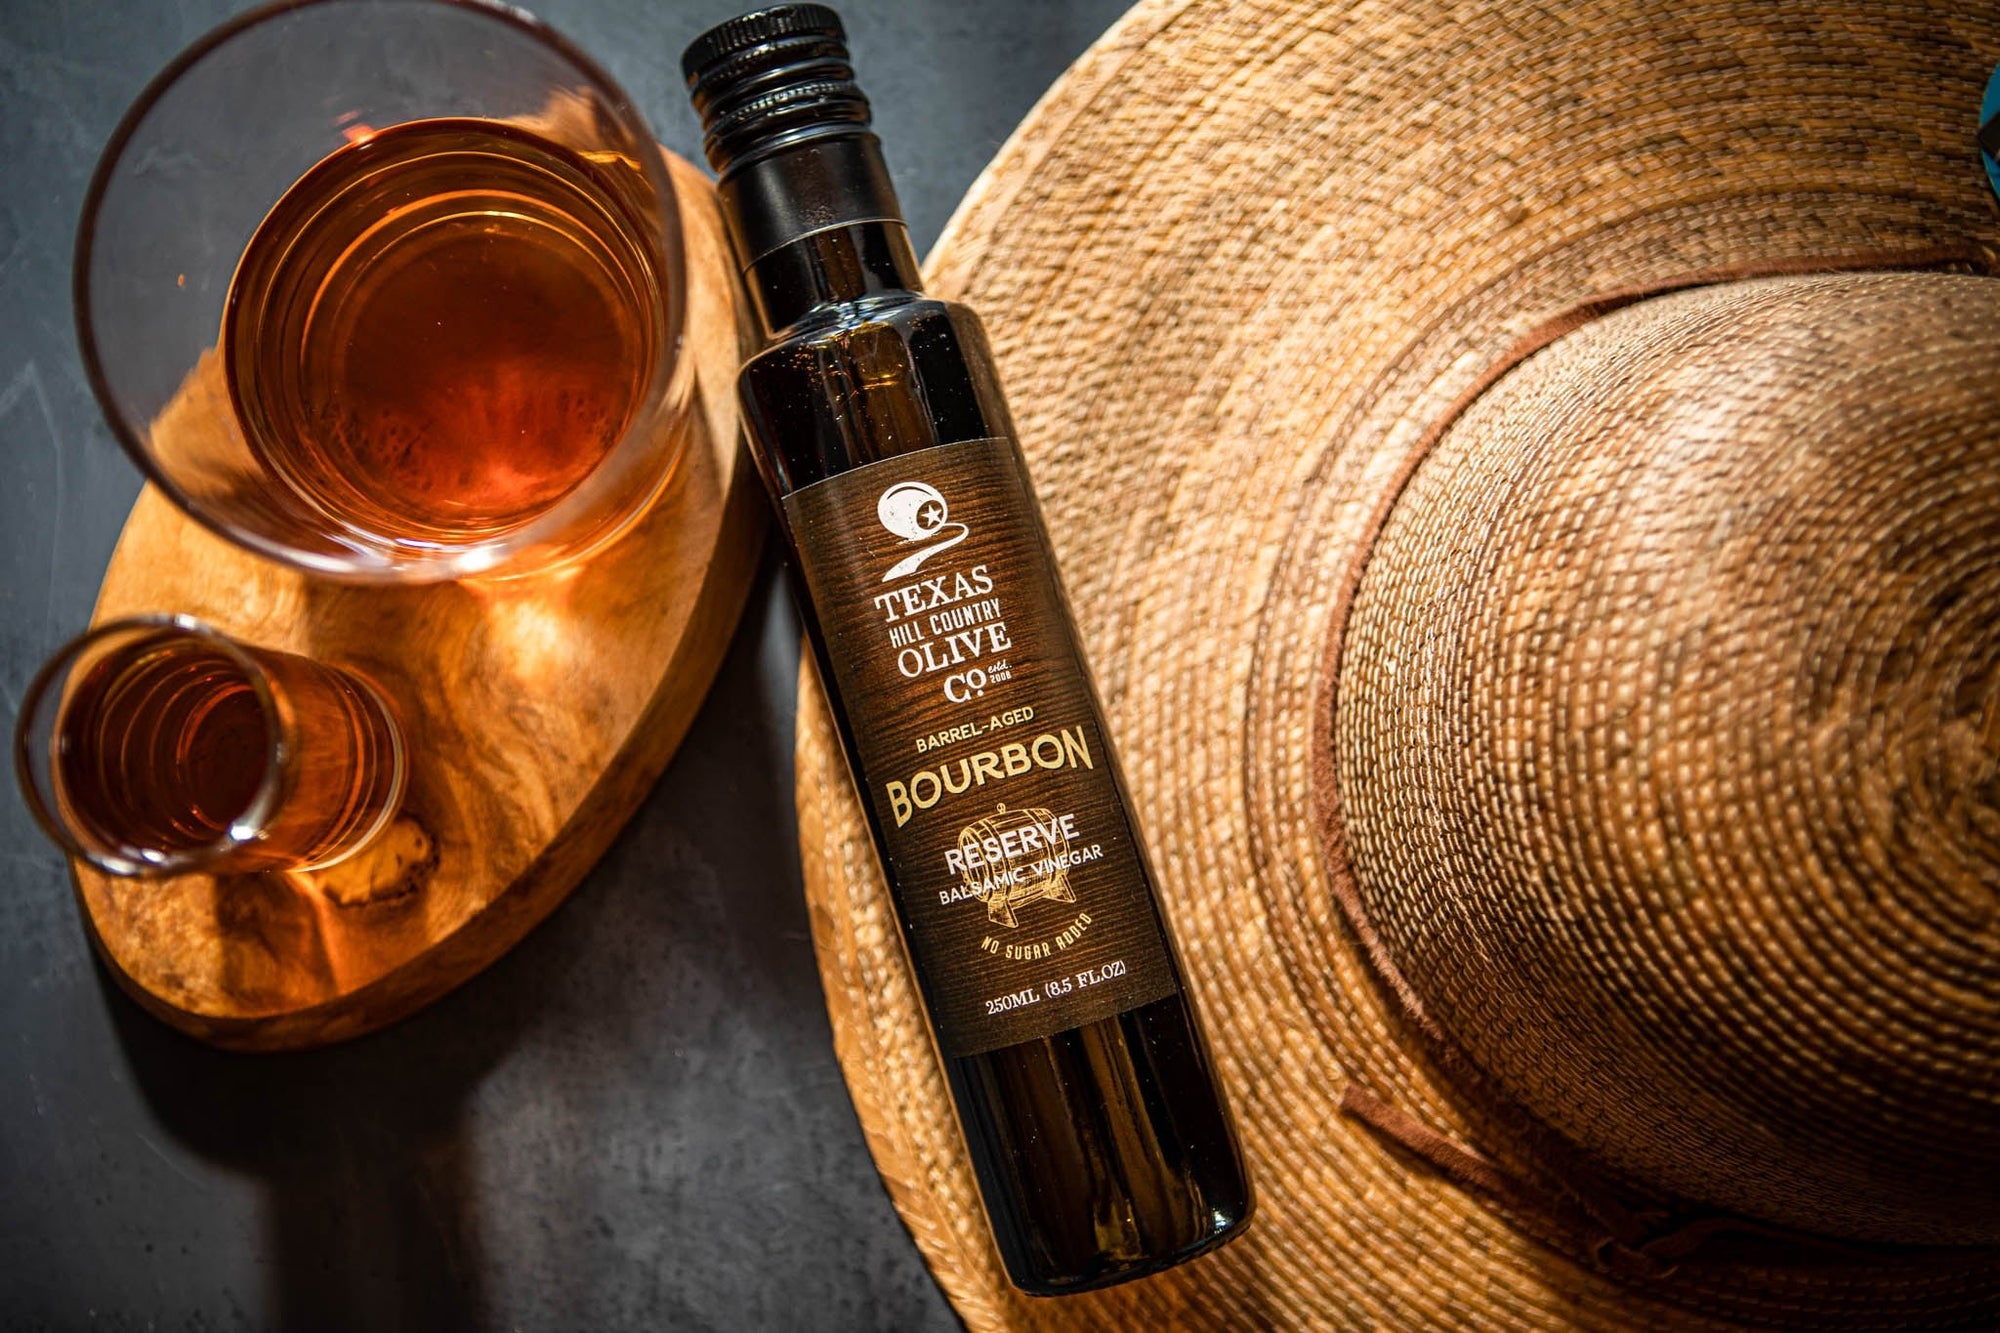 Four Easy Uses For Bourbon Reserve Balsamic Vinegar - Texas Hill Country Olive Co.